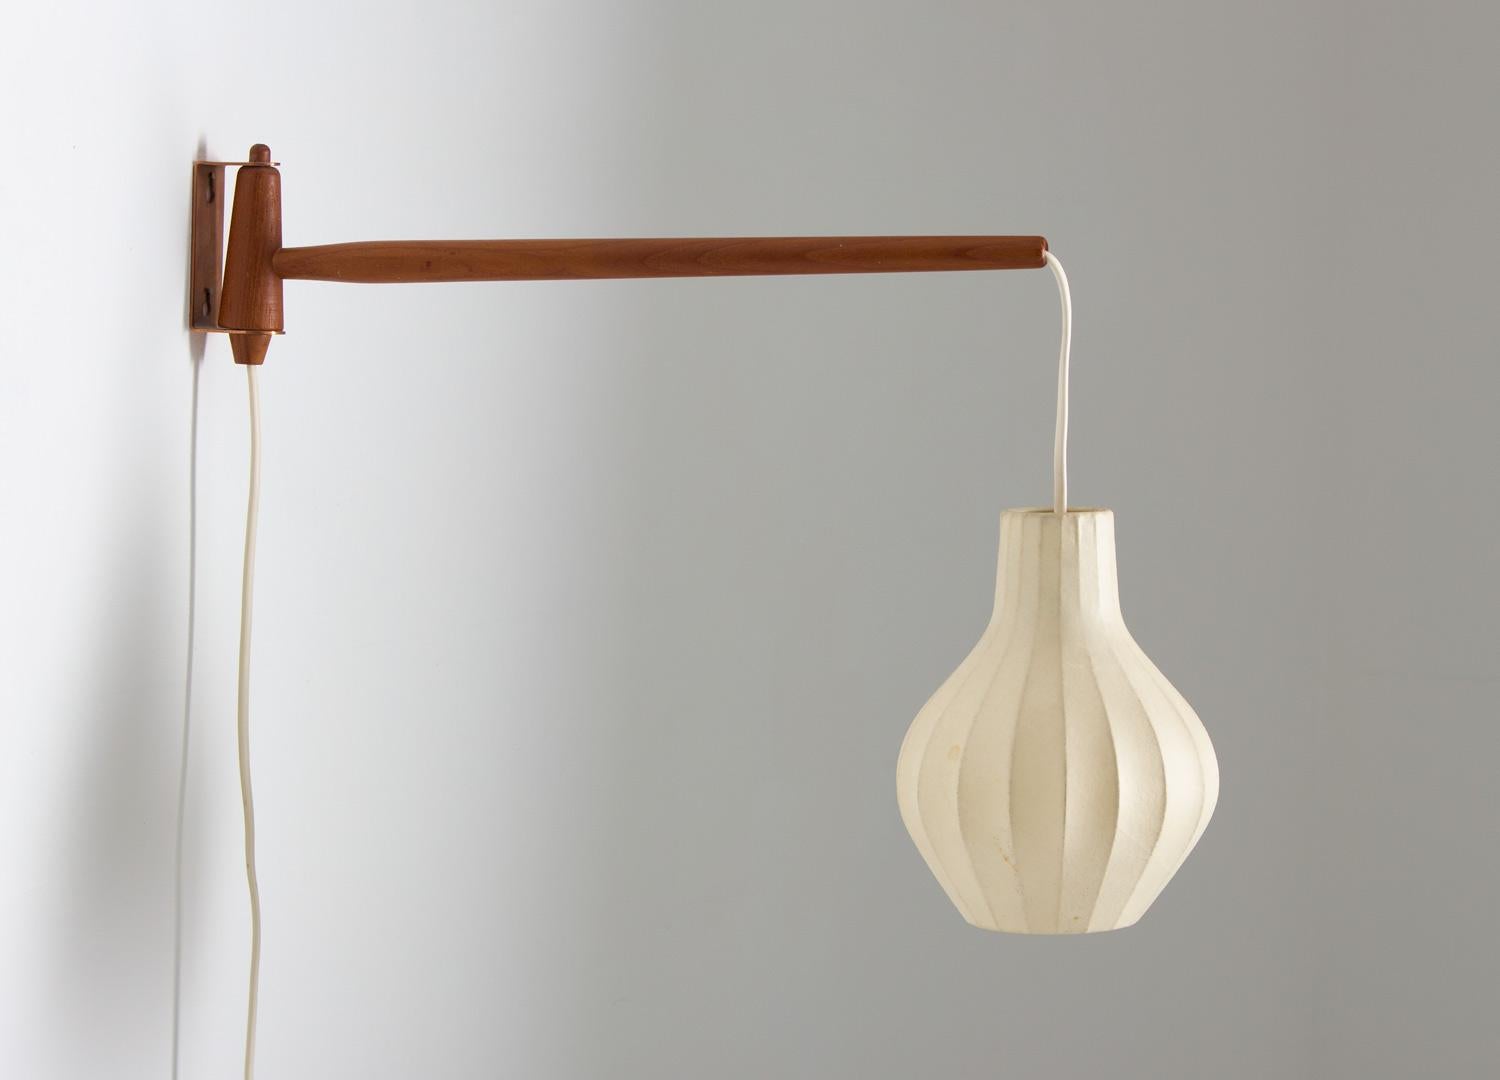 Scandinavian midcentury swivel wall lamp by Hans-Agne Jakobsson.
This early and rare lamp comes with its original cocoon shade. The shade is held by a teak stick, with the wire hidden inside. The lamp is marked 